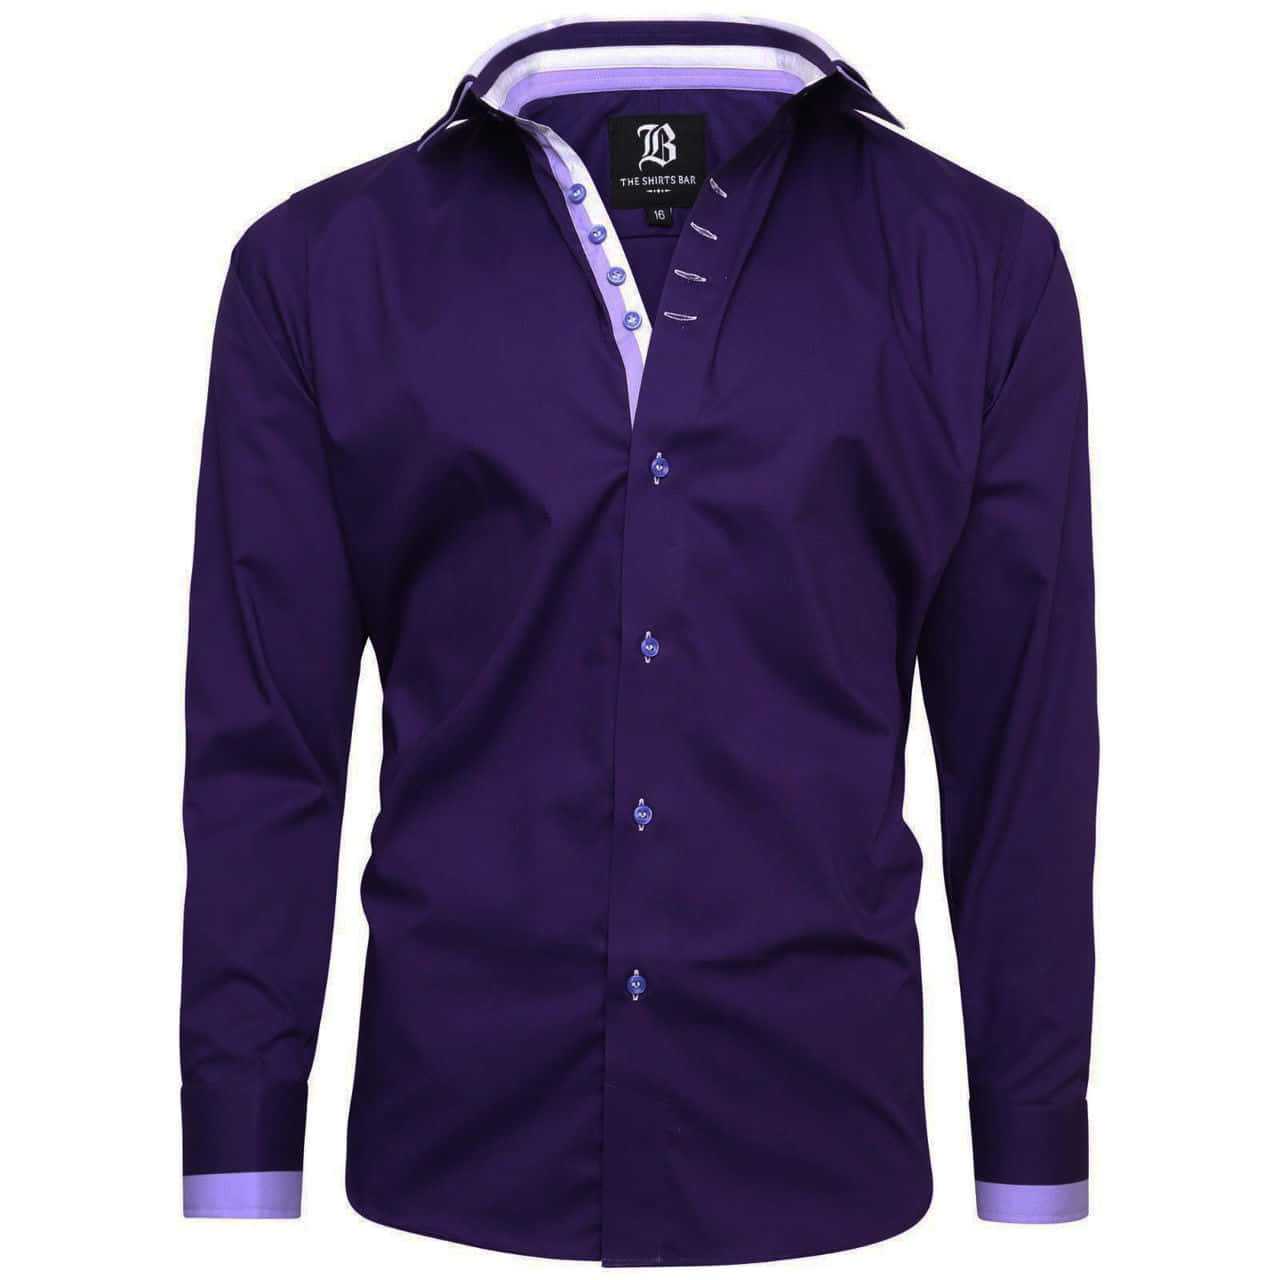 Get Ready To Turn Heads In This Stylish Purple Shirt Wallpaper